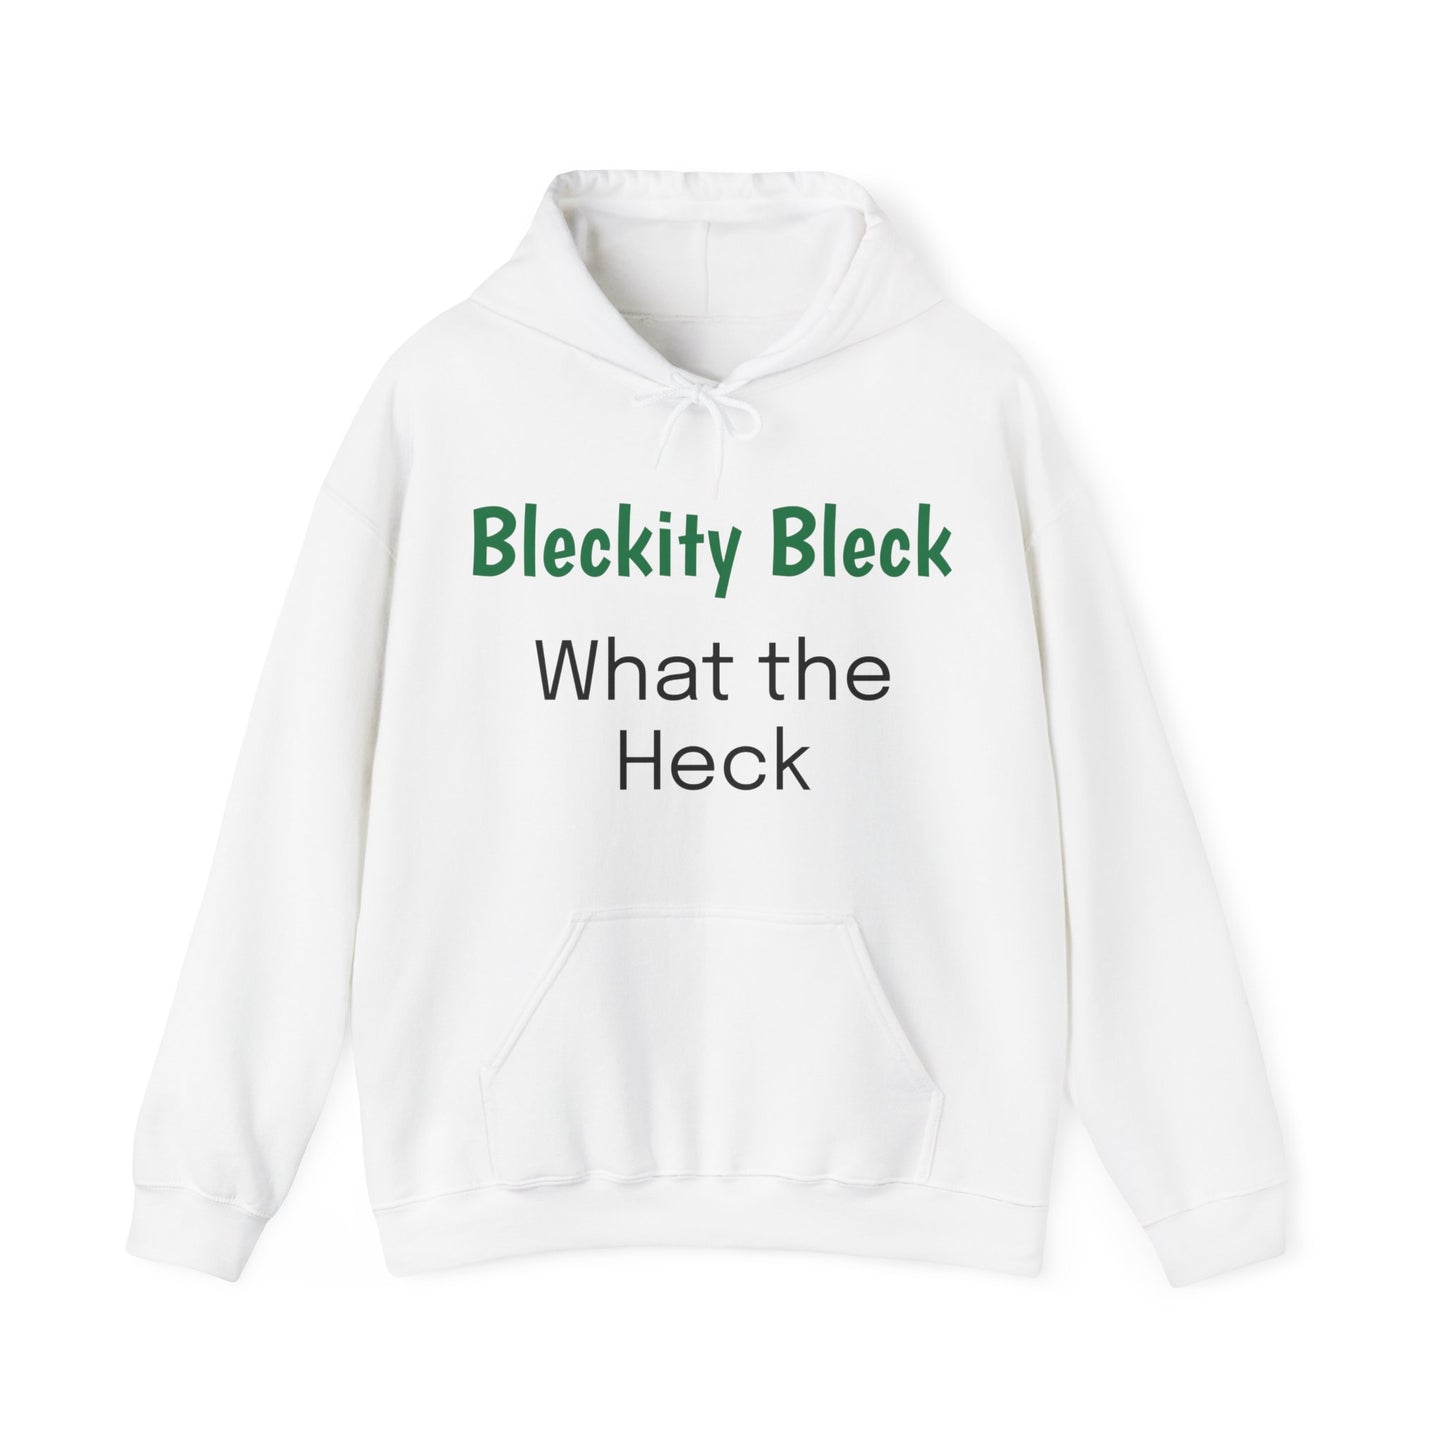 Chrisism No. 4 Hoodie - Bleckity Bleck, What the Heck